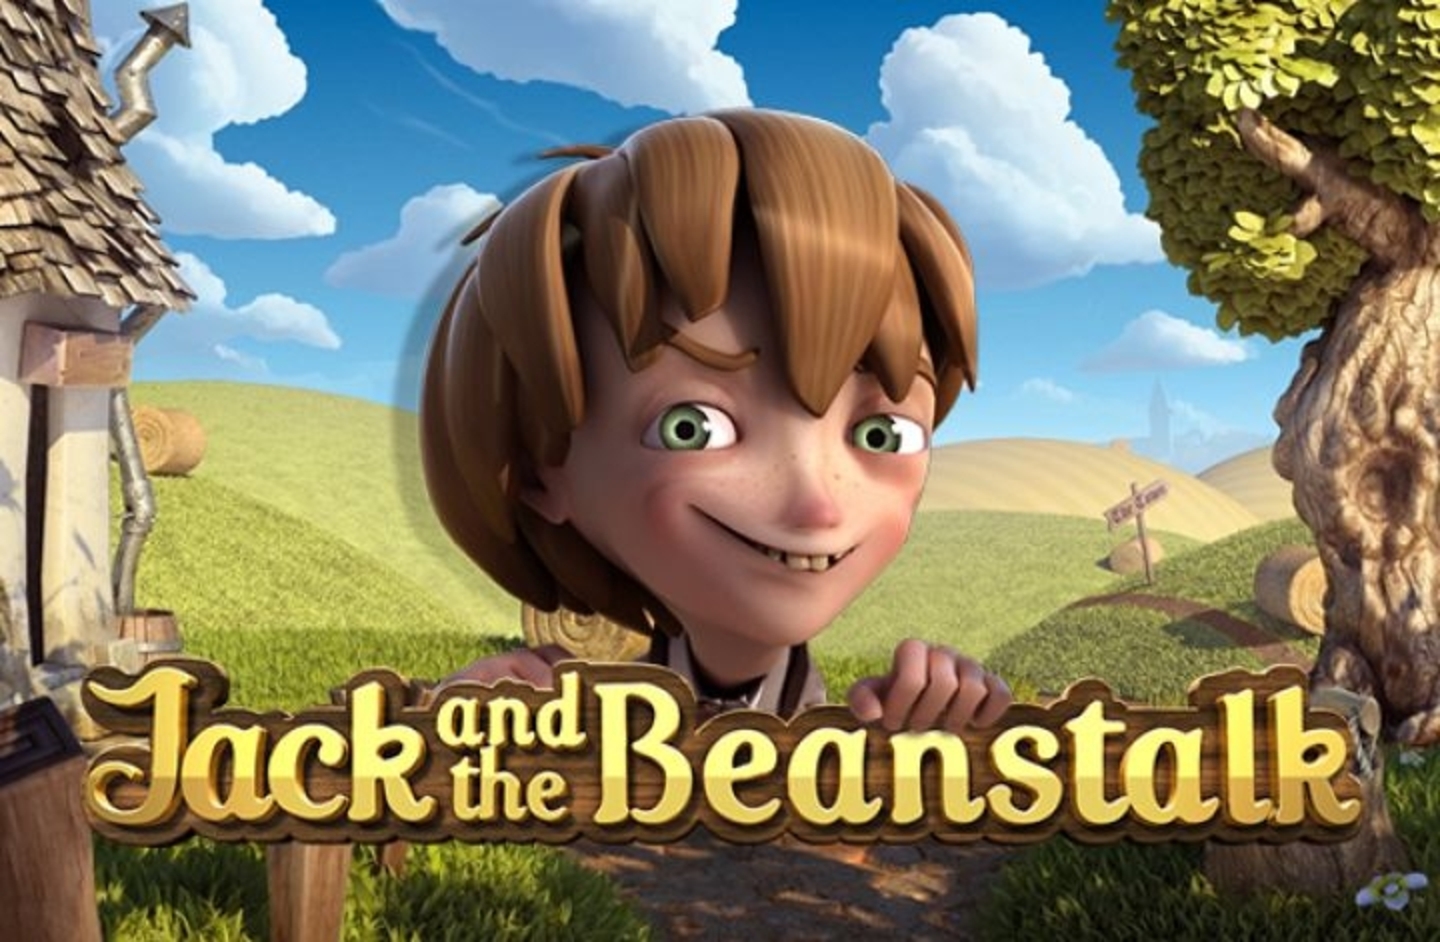 The Jack and the Beanstalk Online Slot Demo Game by NetEnt